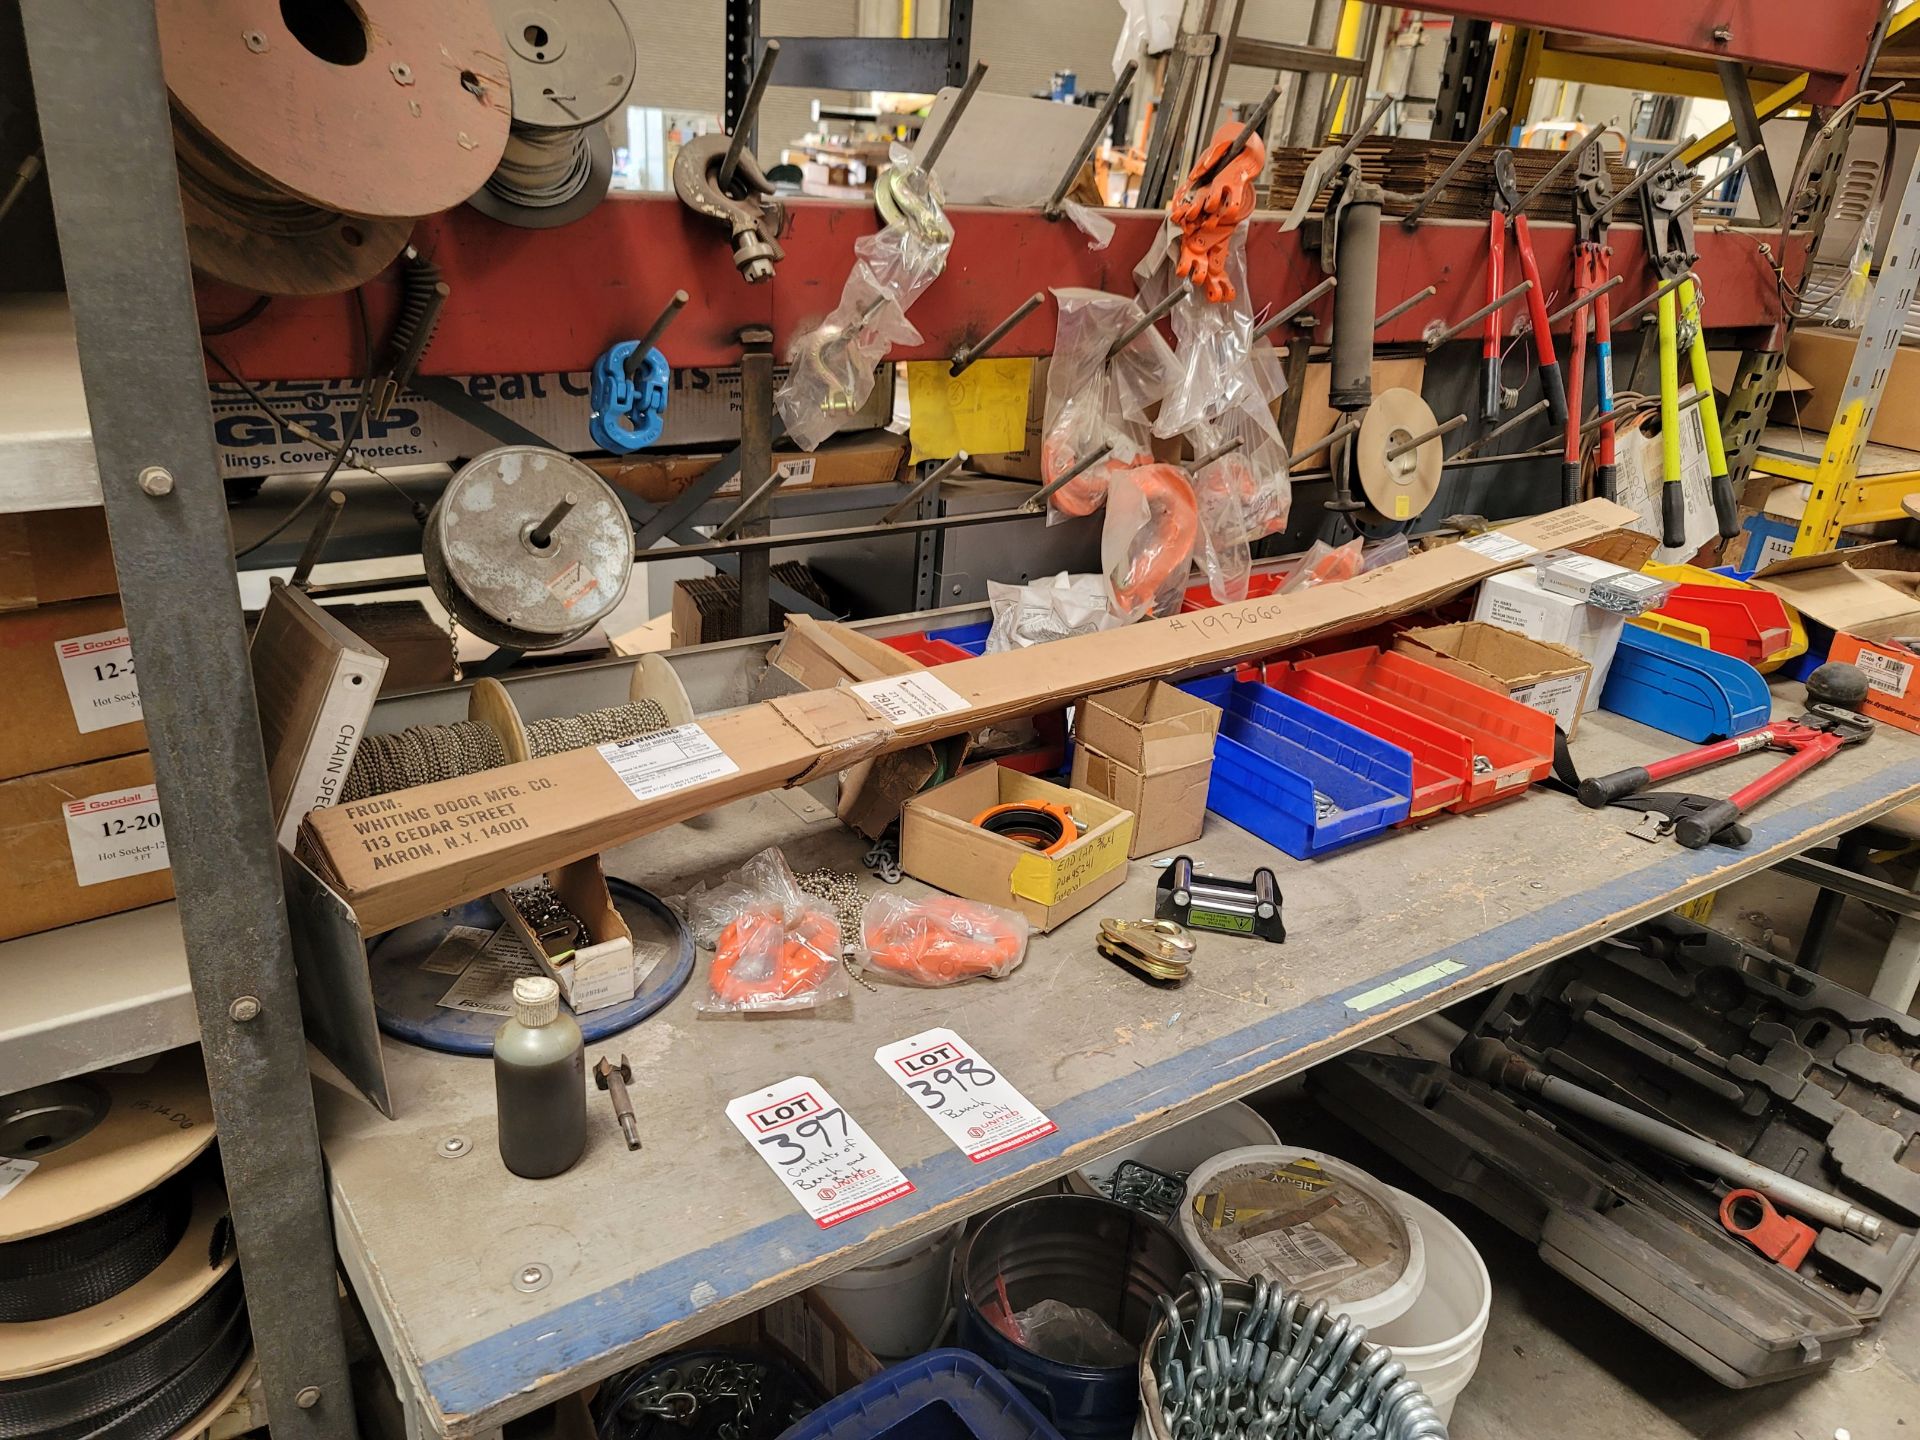 LOT - CONTENTS ONLY ON TOP OF WORKBENCH, TO INCLUDE: LIFTING HOOKS, SMALL CHAIN, ETC., WORKBENCH NOT